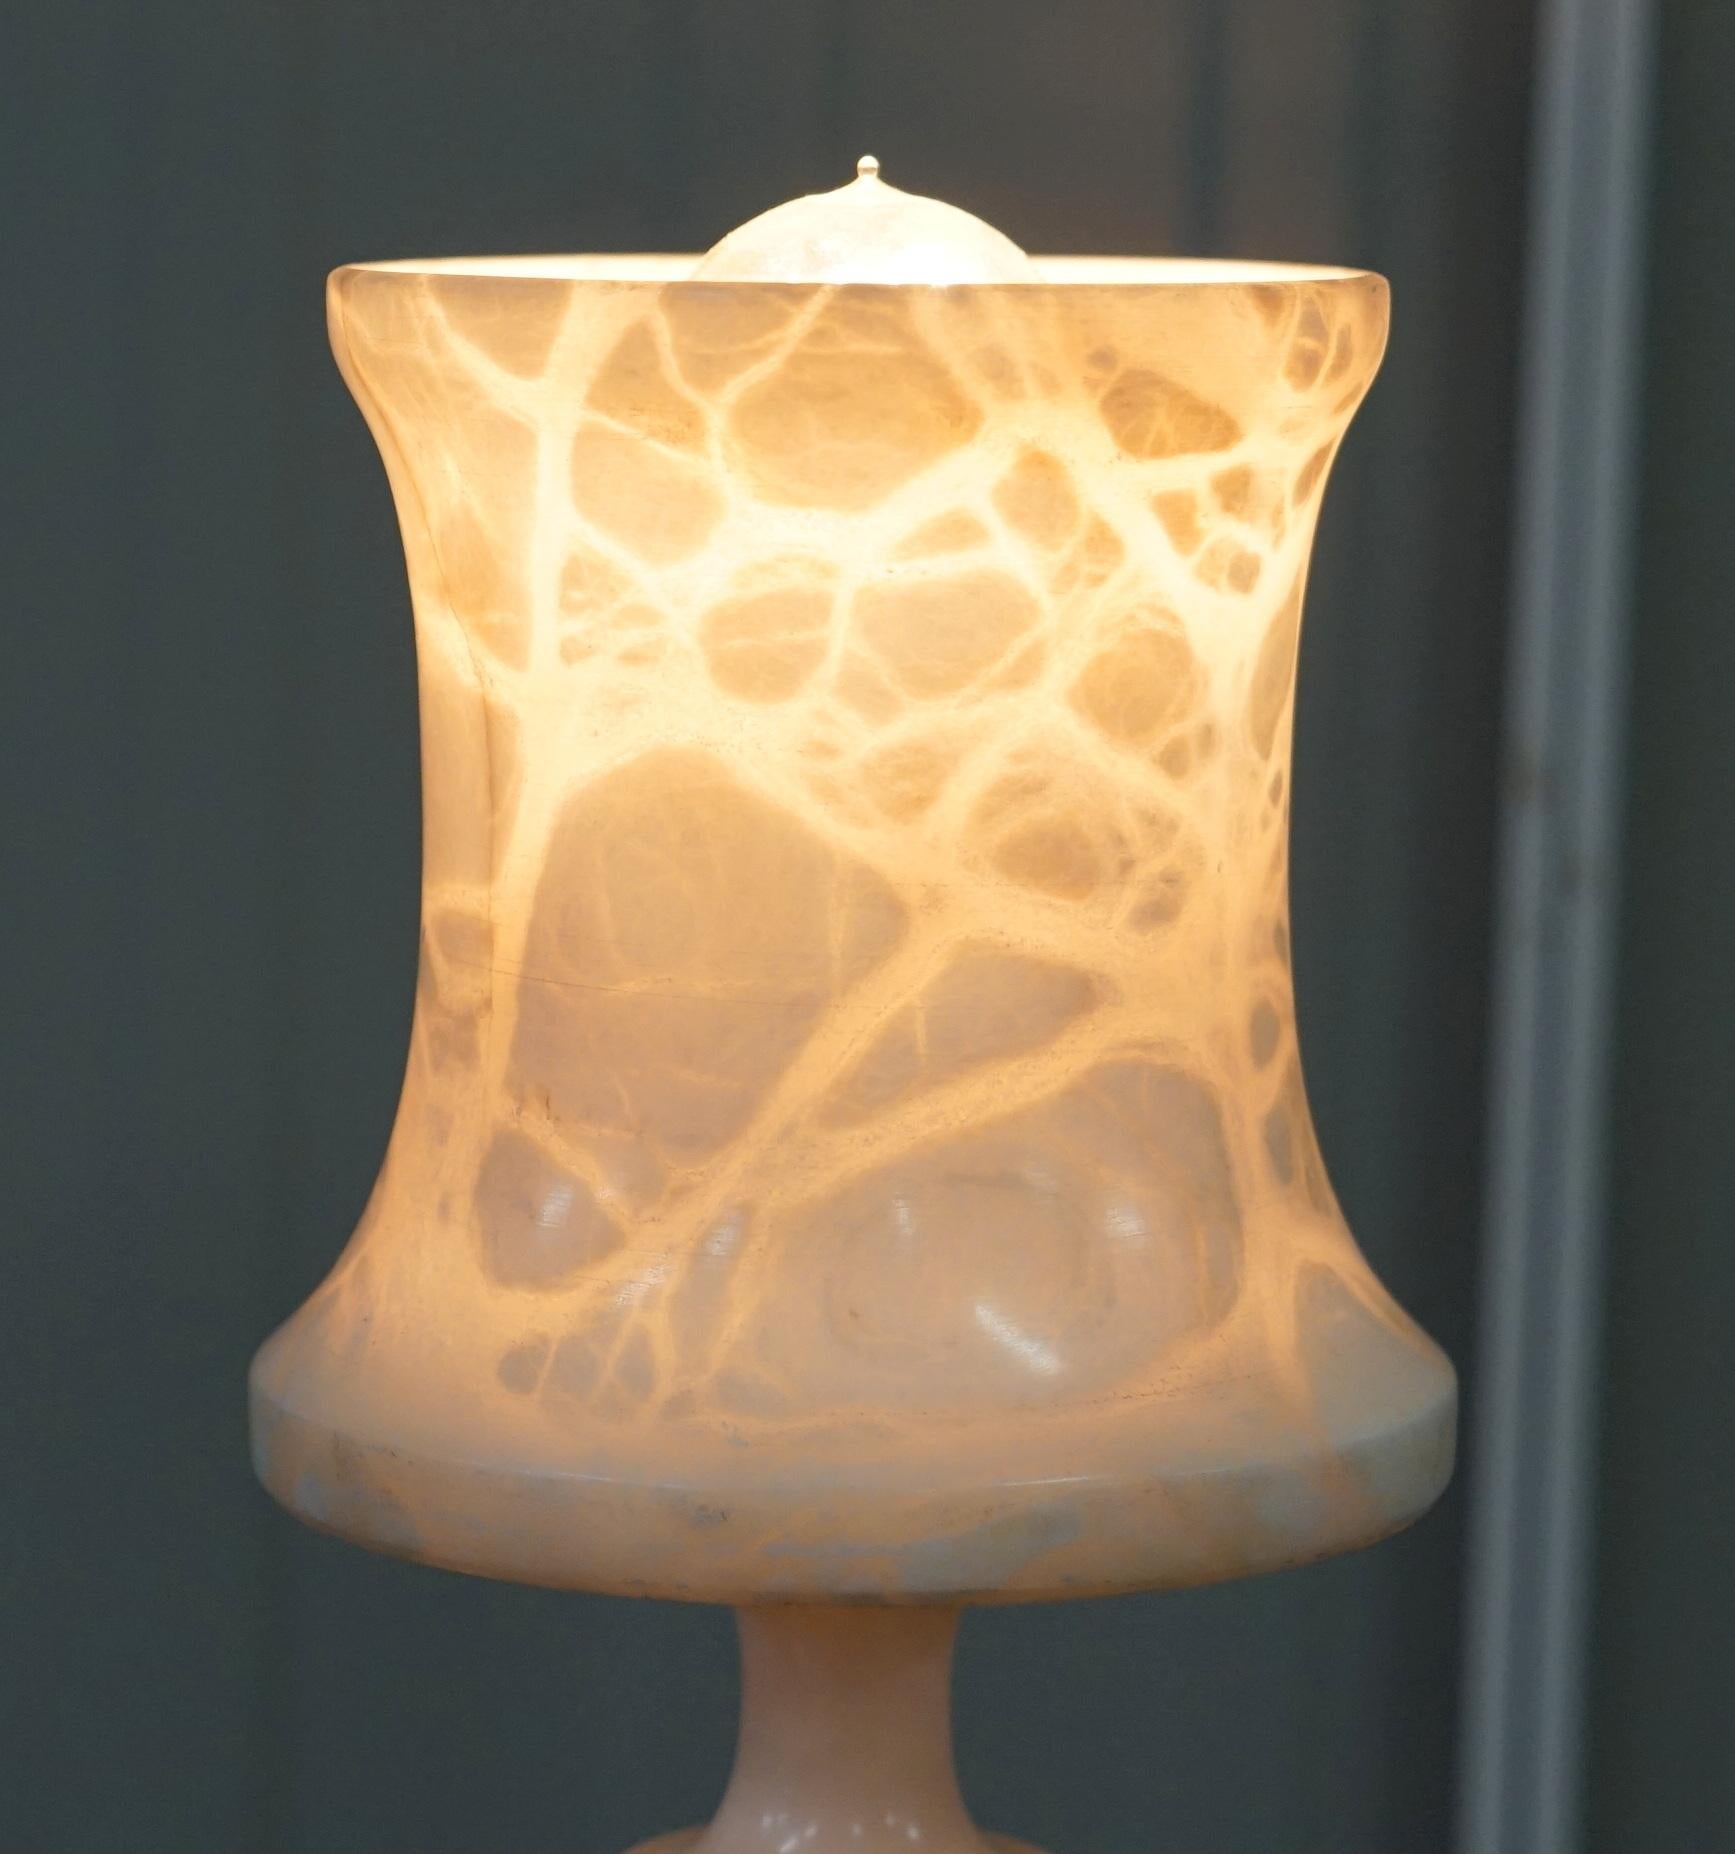 Wimbledon-Furniture

Wimbledon-Furniture is delighted to offer for sale this stunning original Edwardian circa 1900 Veined marble table lamp with marble shade

A very good looking and well made piece, the light has been fully restored to include